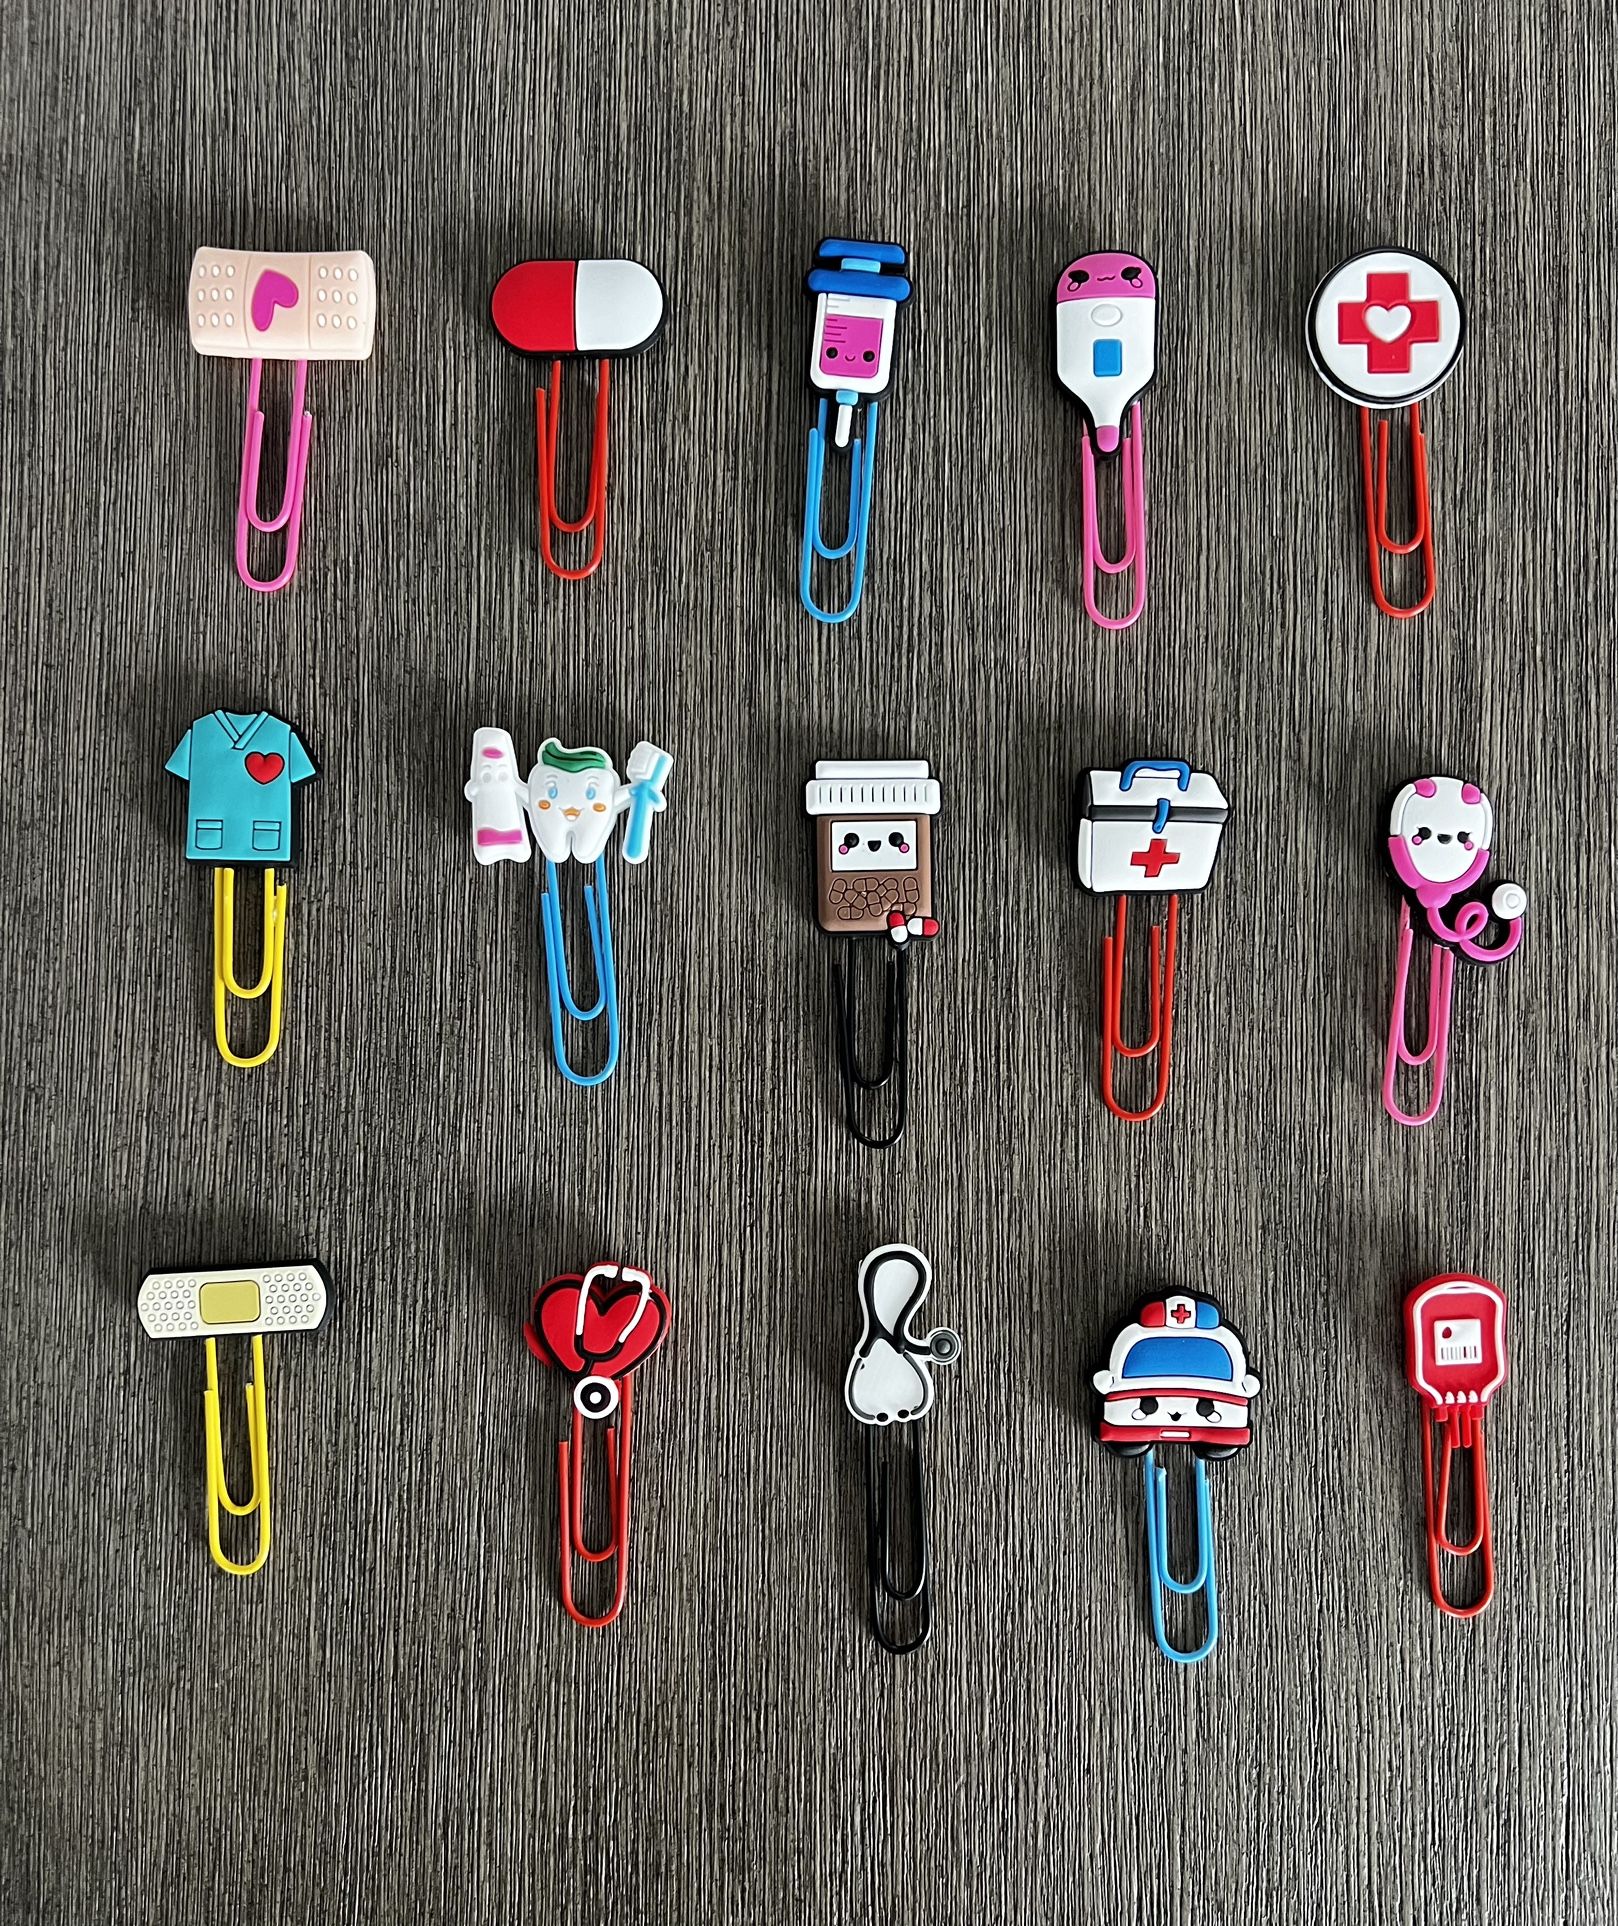 Medical Nurse Doctors Paper Clips, Balloon, Office Stationery Accessories, Planner clips decor, Paper Holder, Bookmarkers, Binder Clip